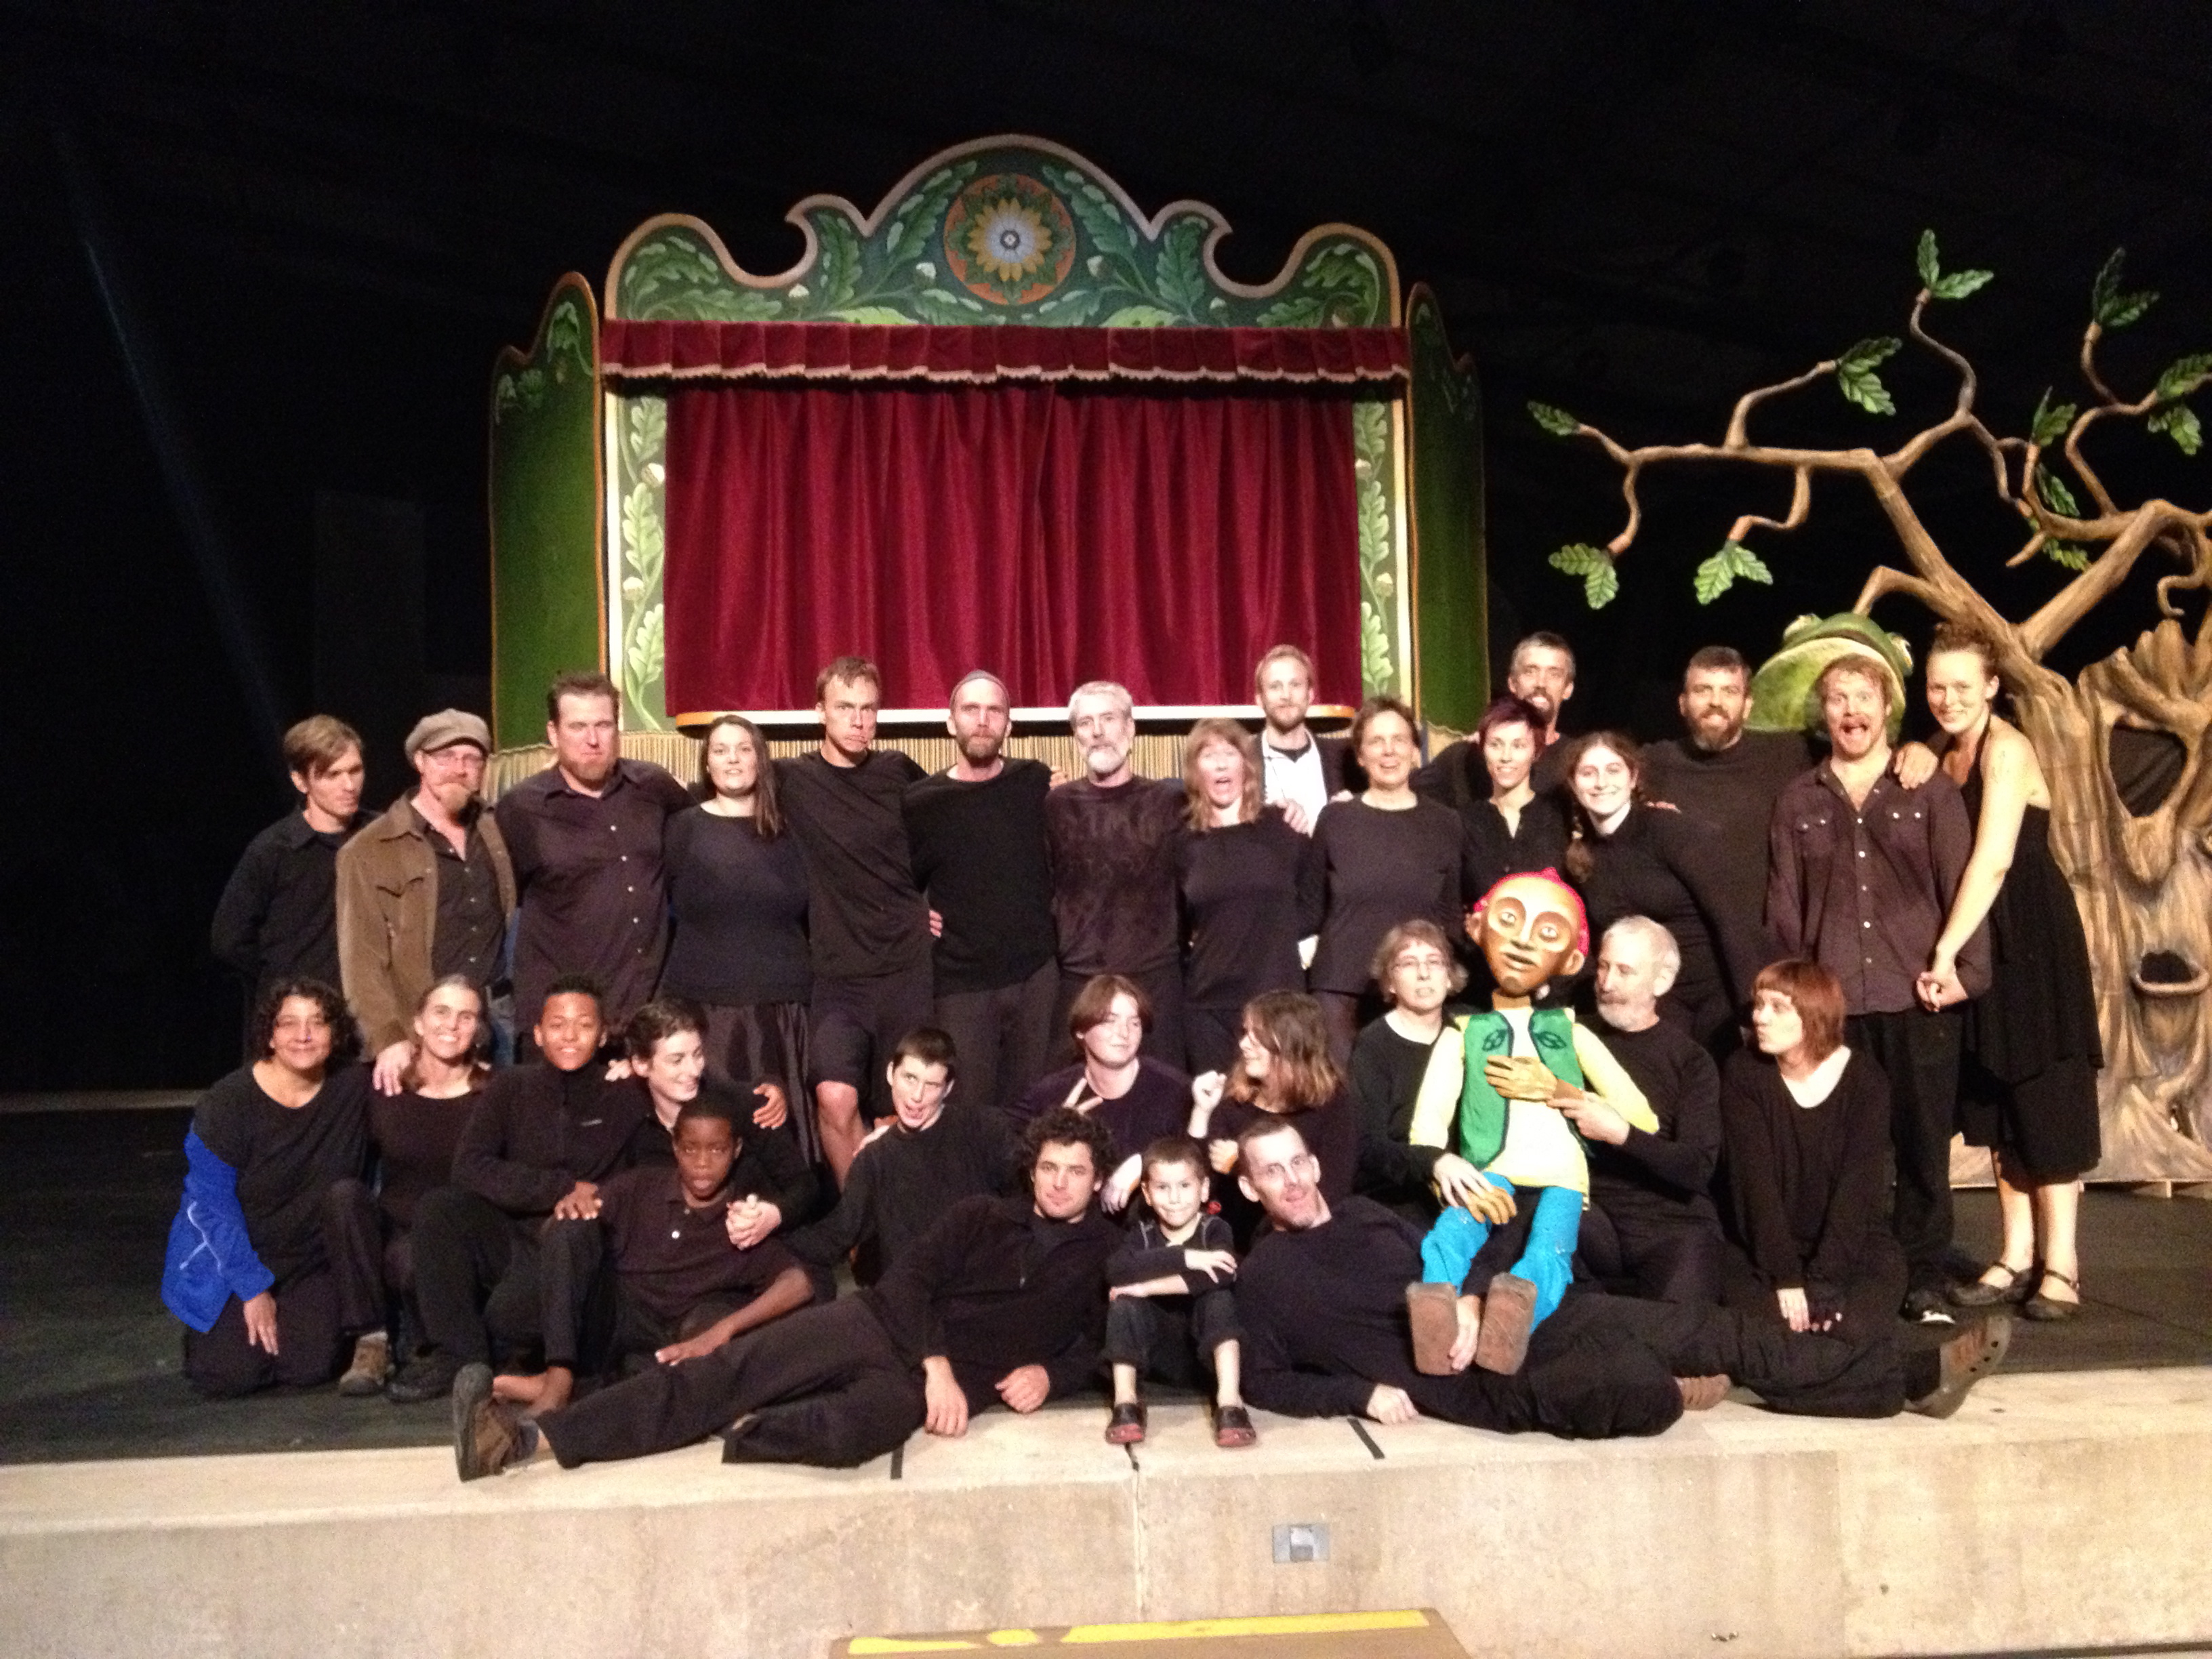 Cast of "City of Frogs" 2012